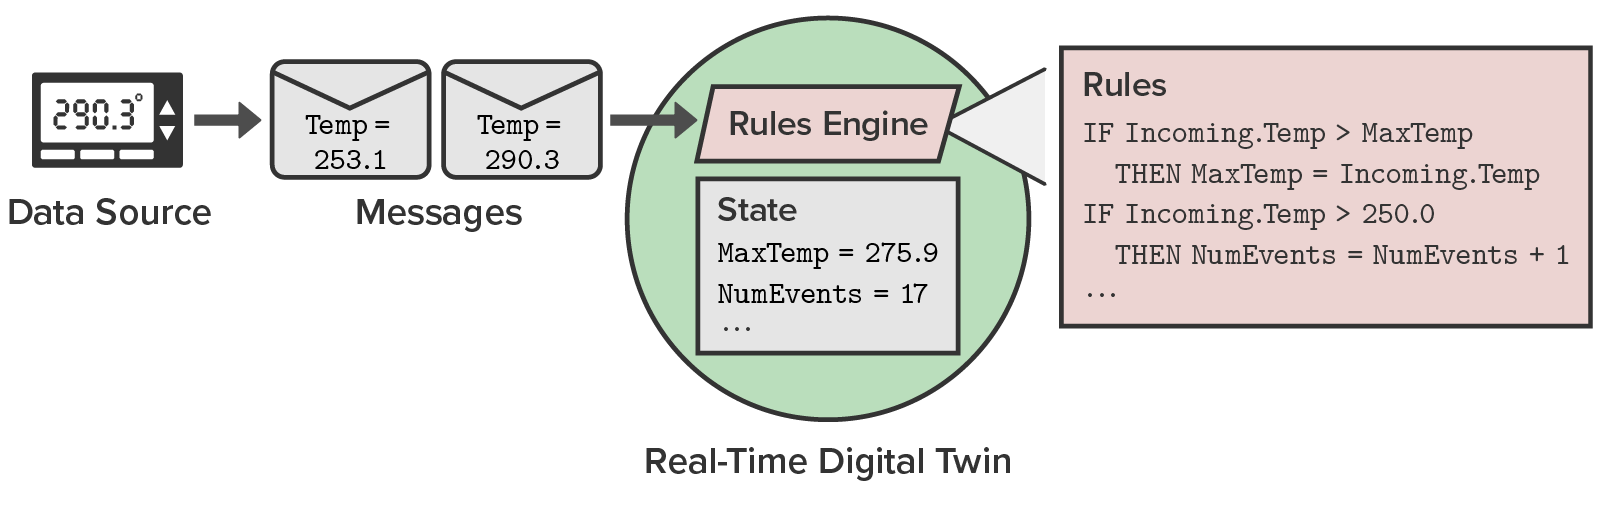 Example of rules-based message processing in a digital twin